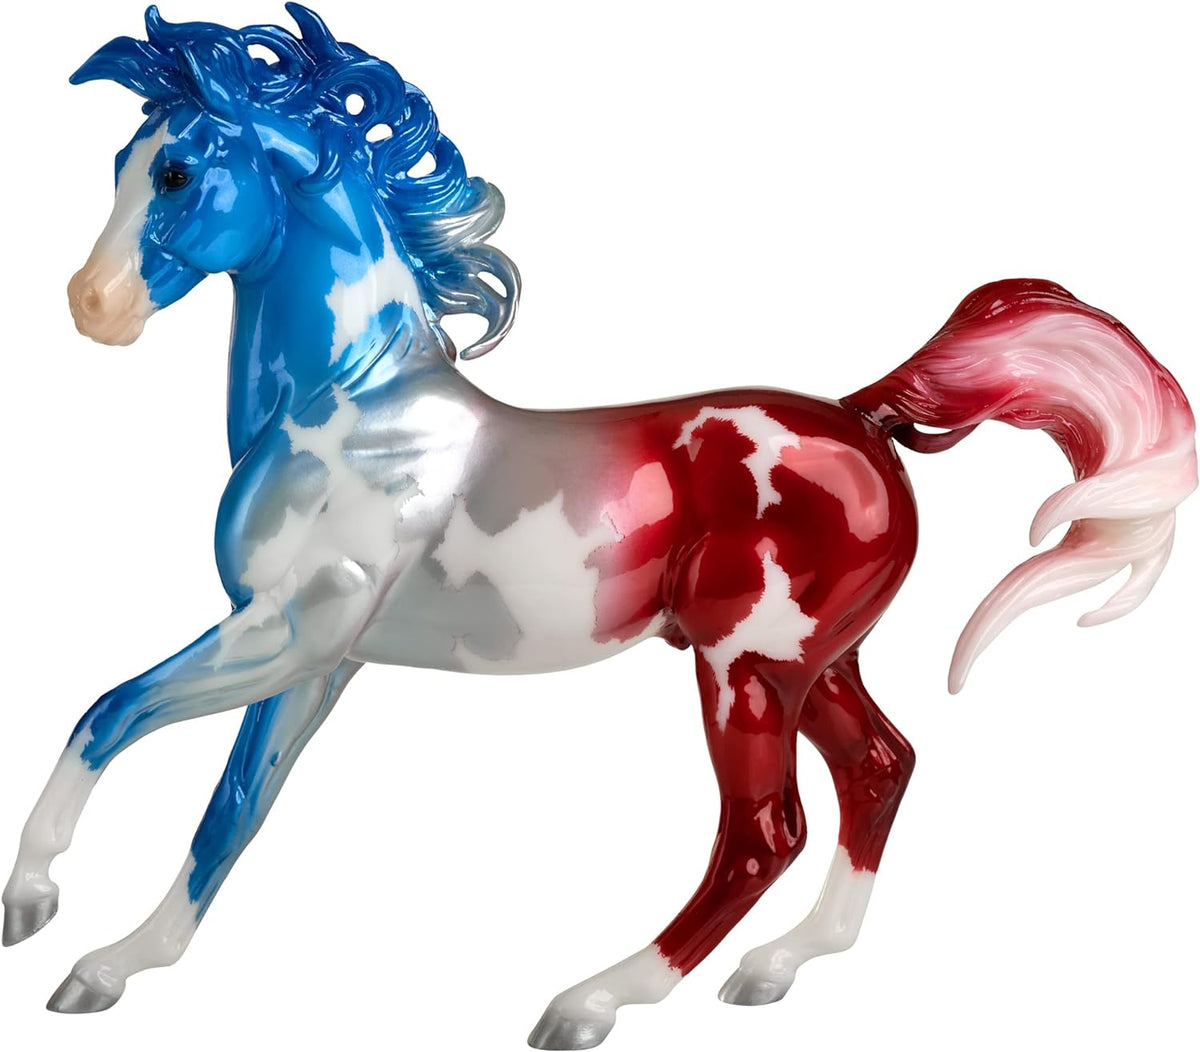 Breyer Horses Traditional Series Collector Model | Anthem | Patriotic Red, White and Blue | 2022 Limited Edition | Horse Toy Model | 11.5" x 8.5" | 1:9 Scale Horse Figurine | Model #1858